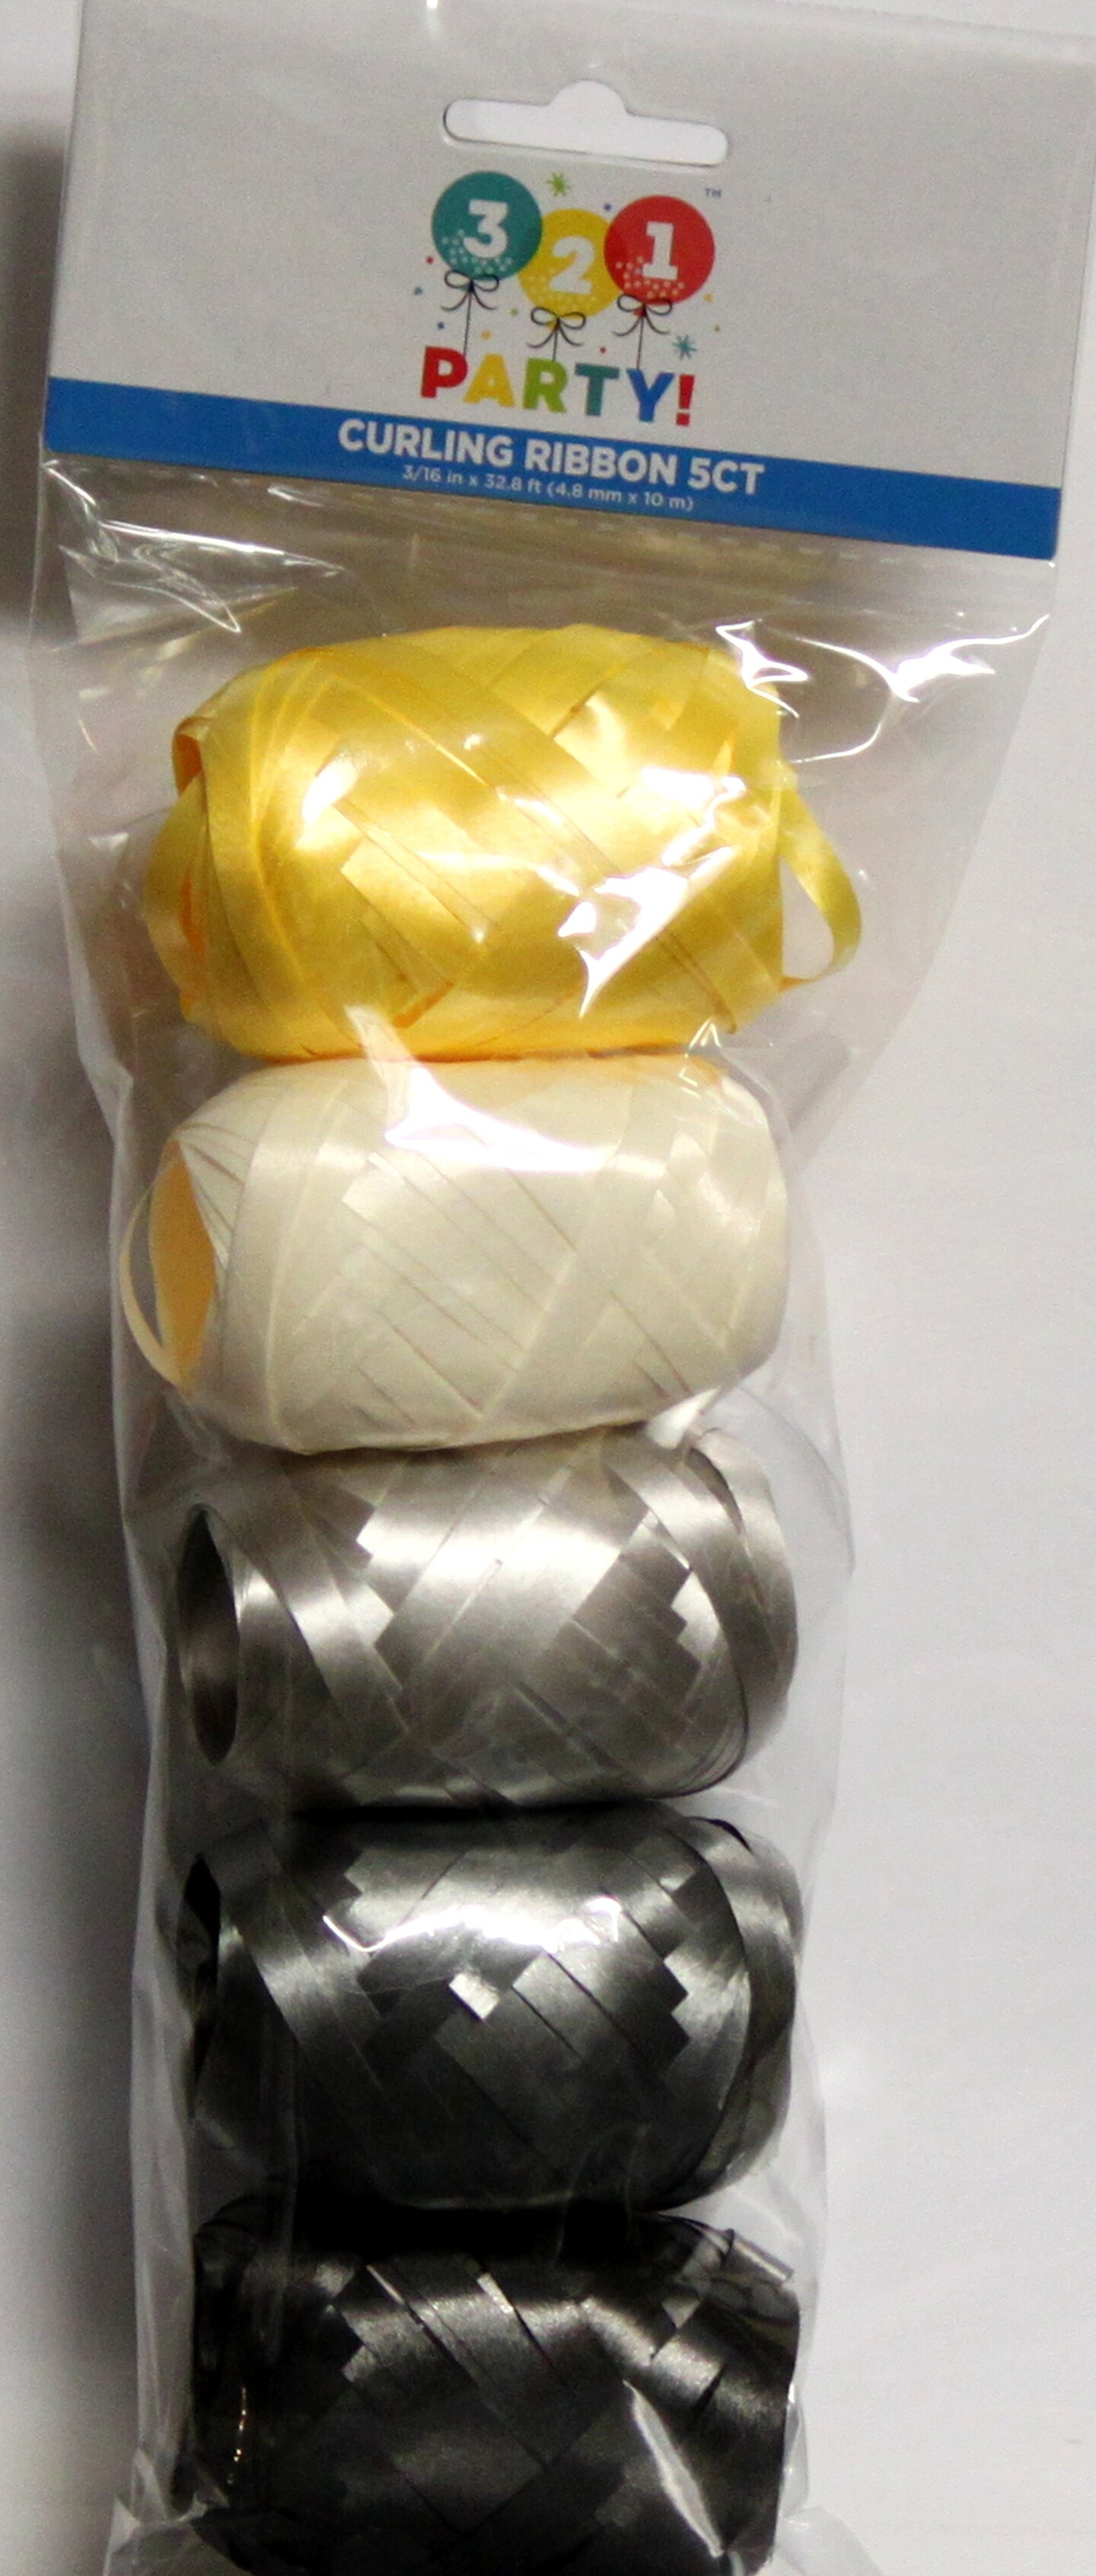 321 Party Curling Ribbon 5 Count